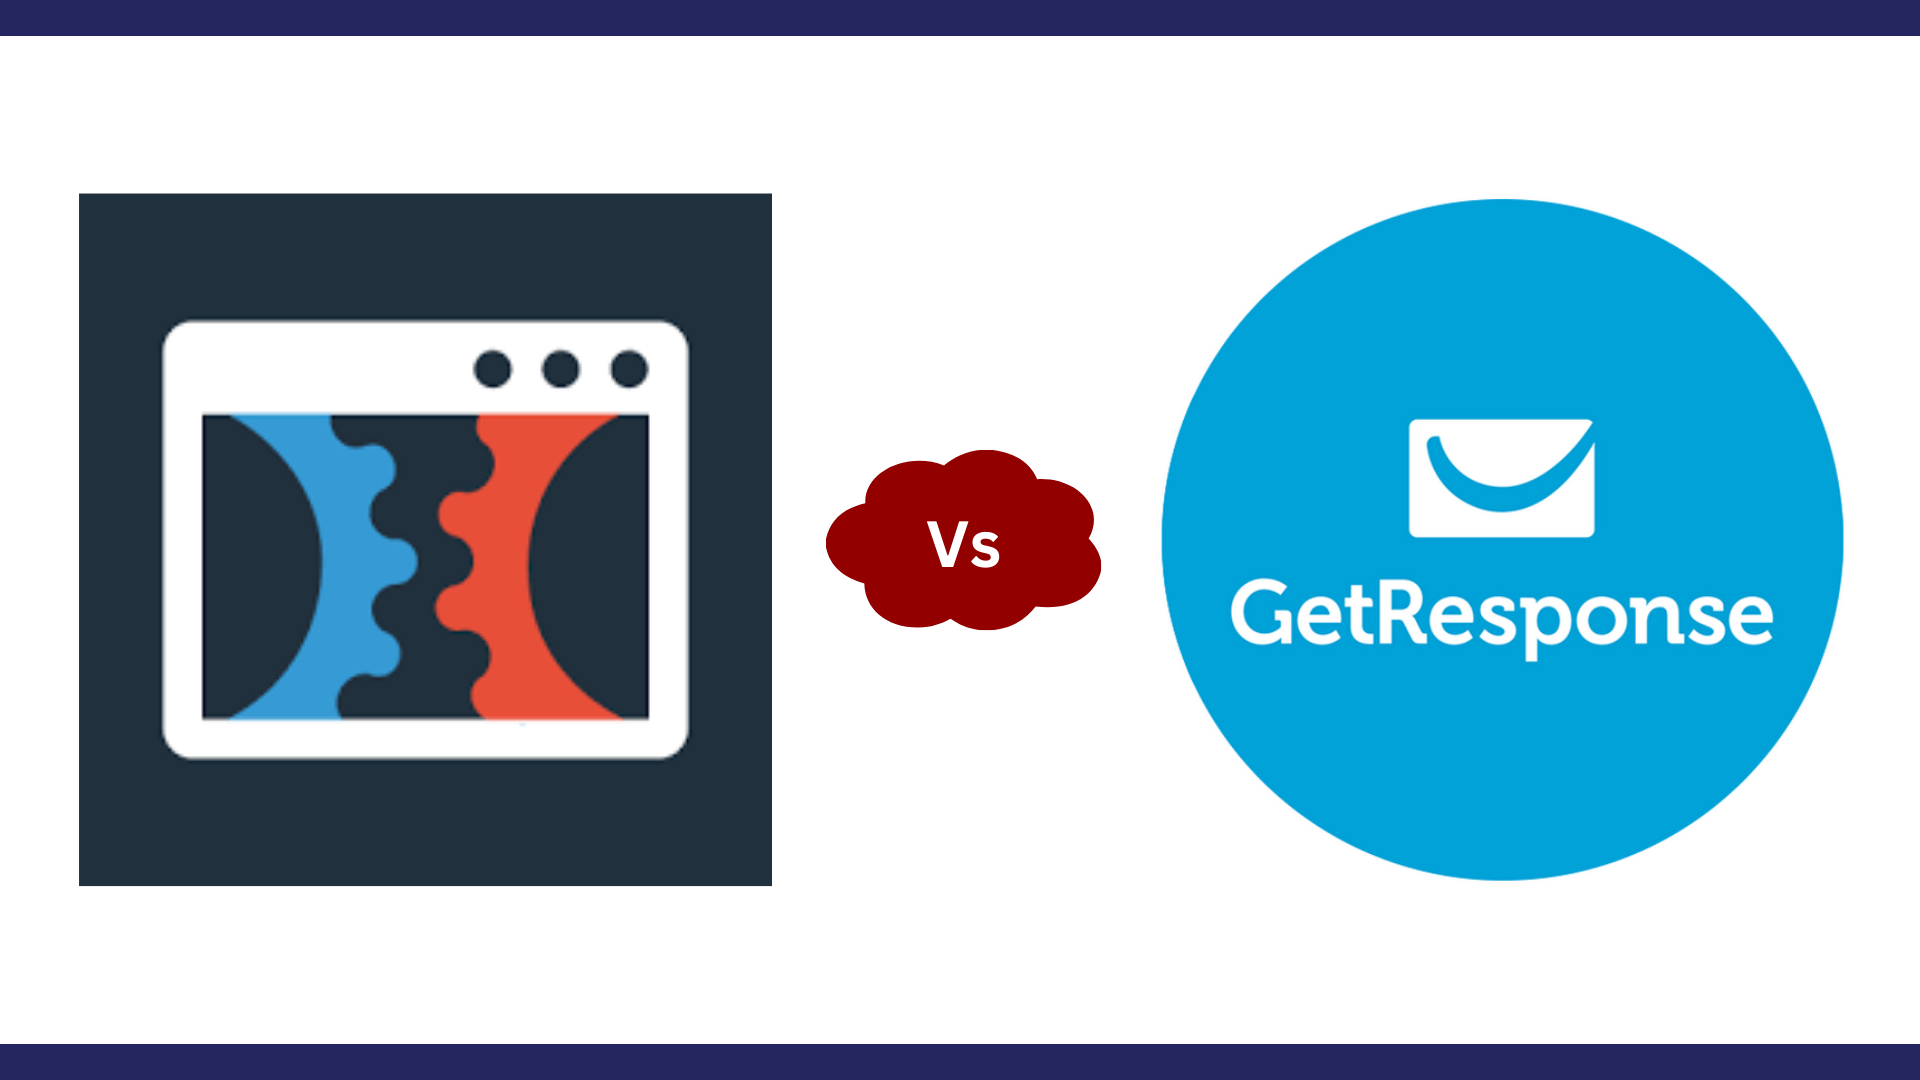 ClickFunnels Vs GetResponse: Which One Is Better to Help Boost Your Business?